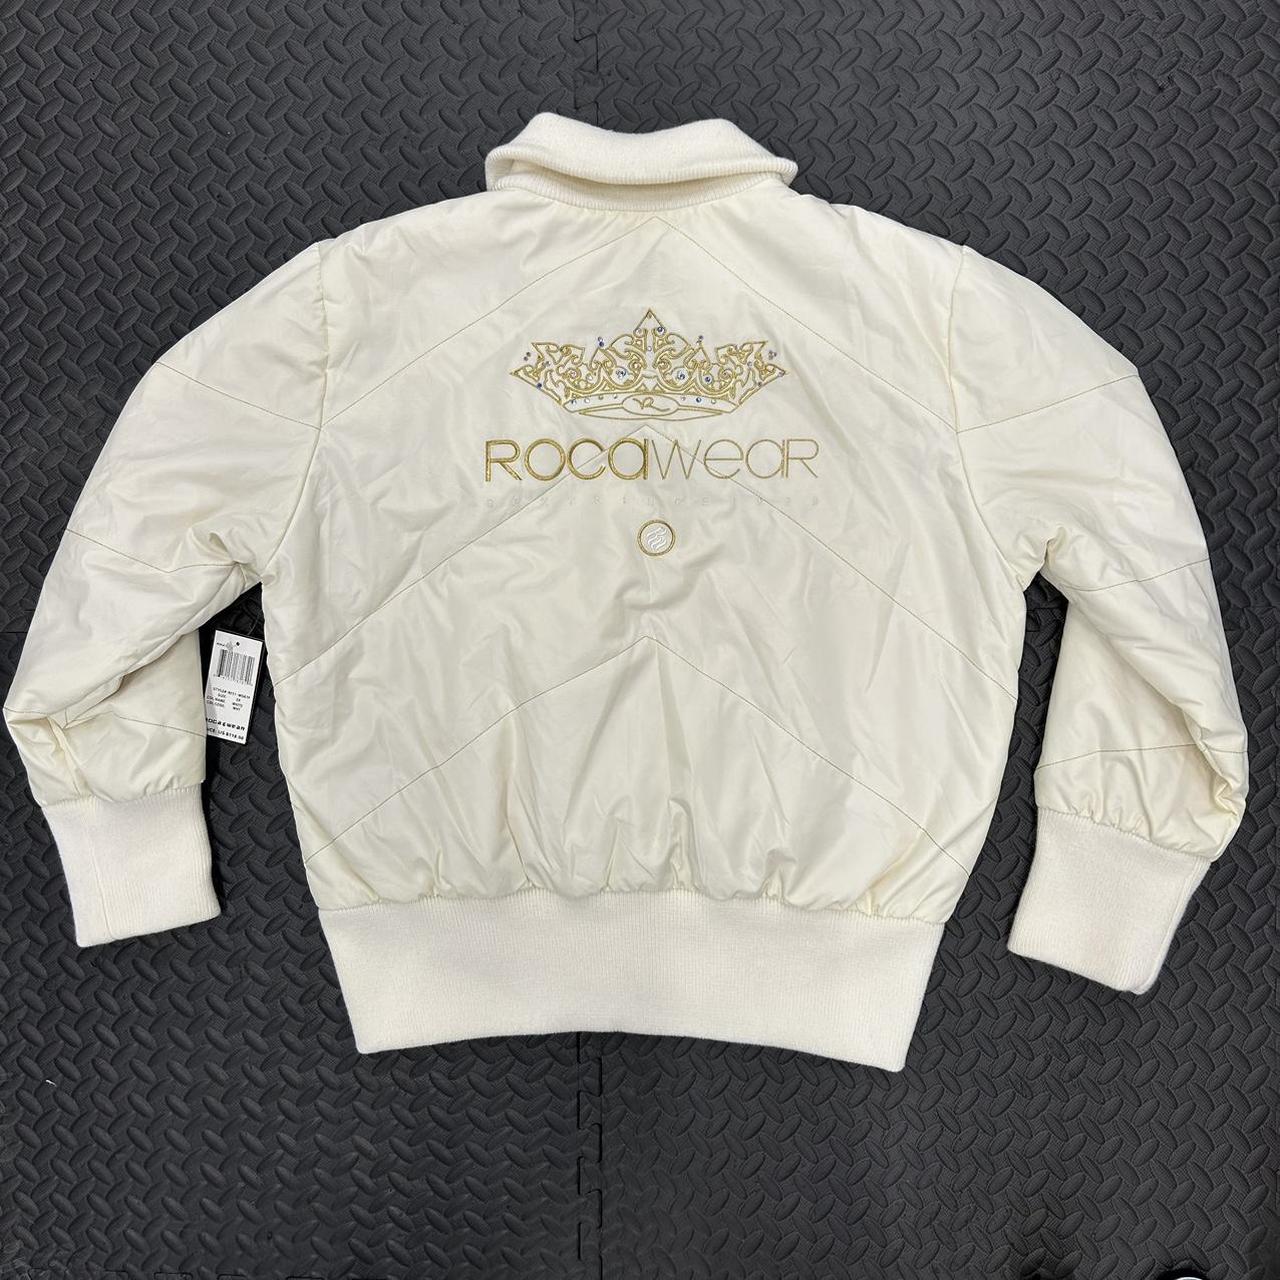 Rocawear Women's White and Gold Jacket | Depop